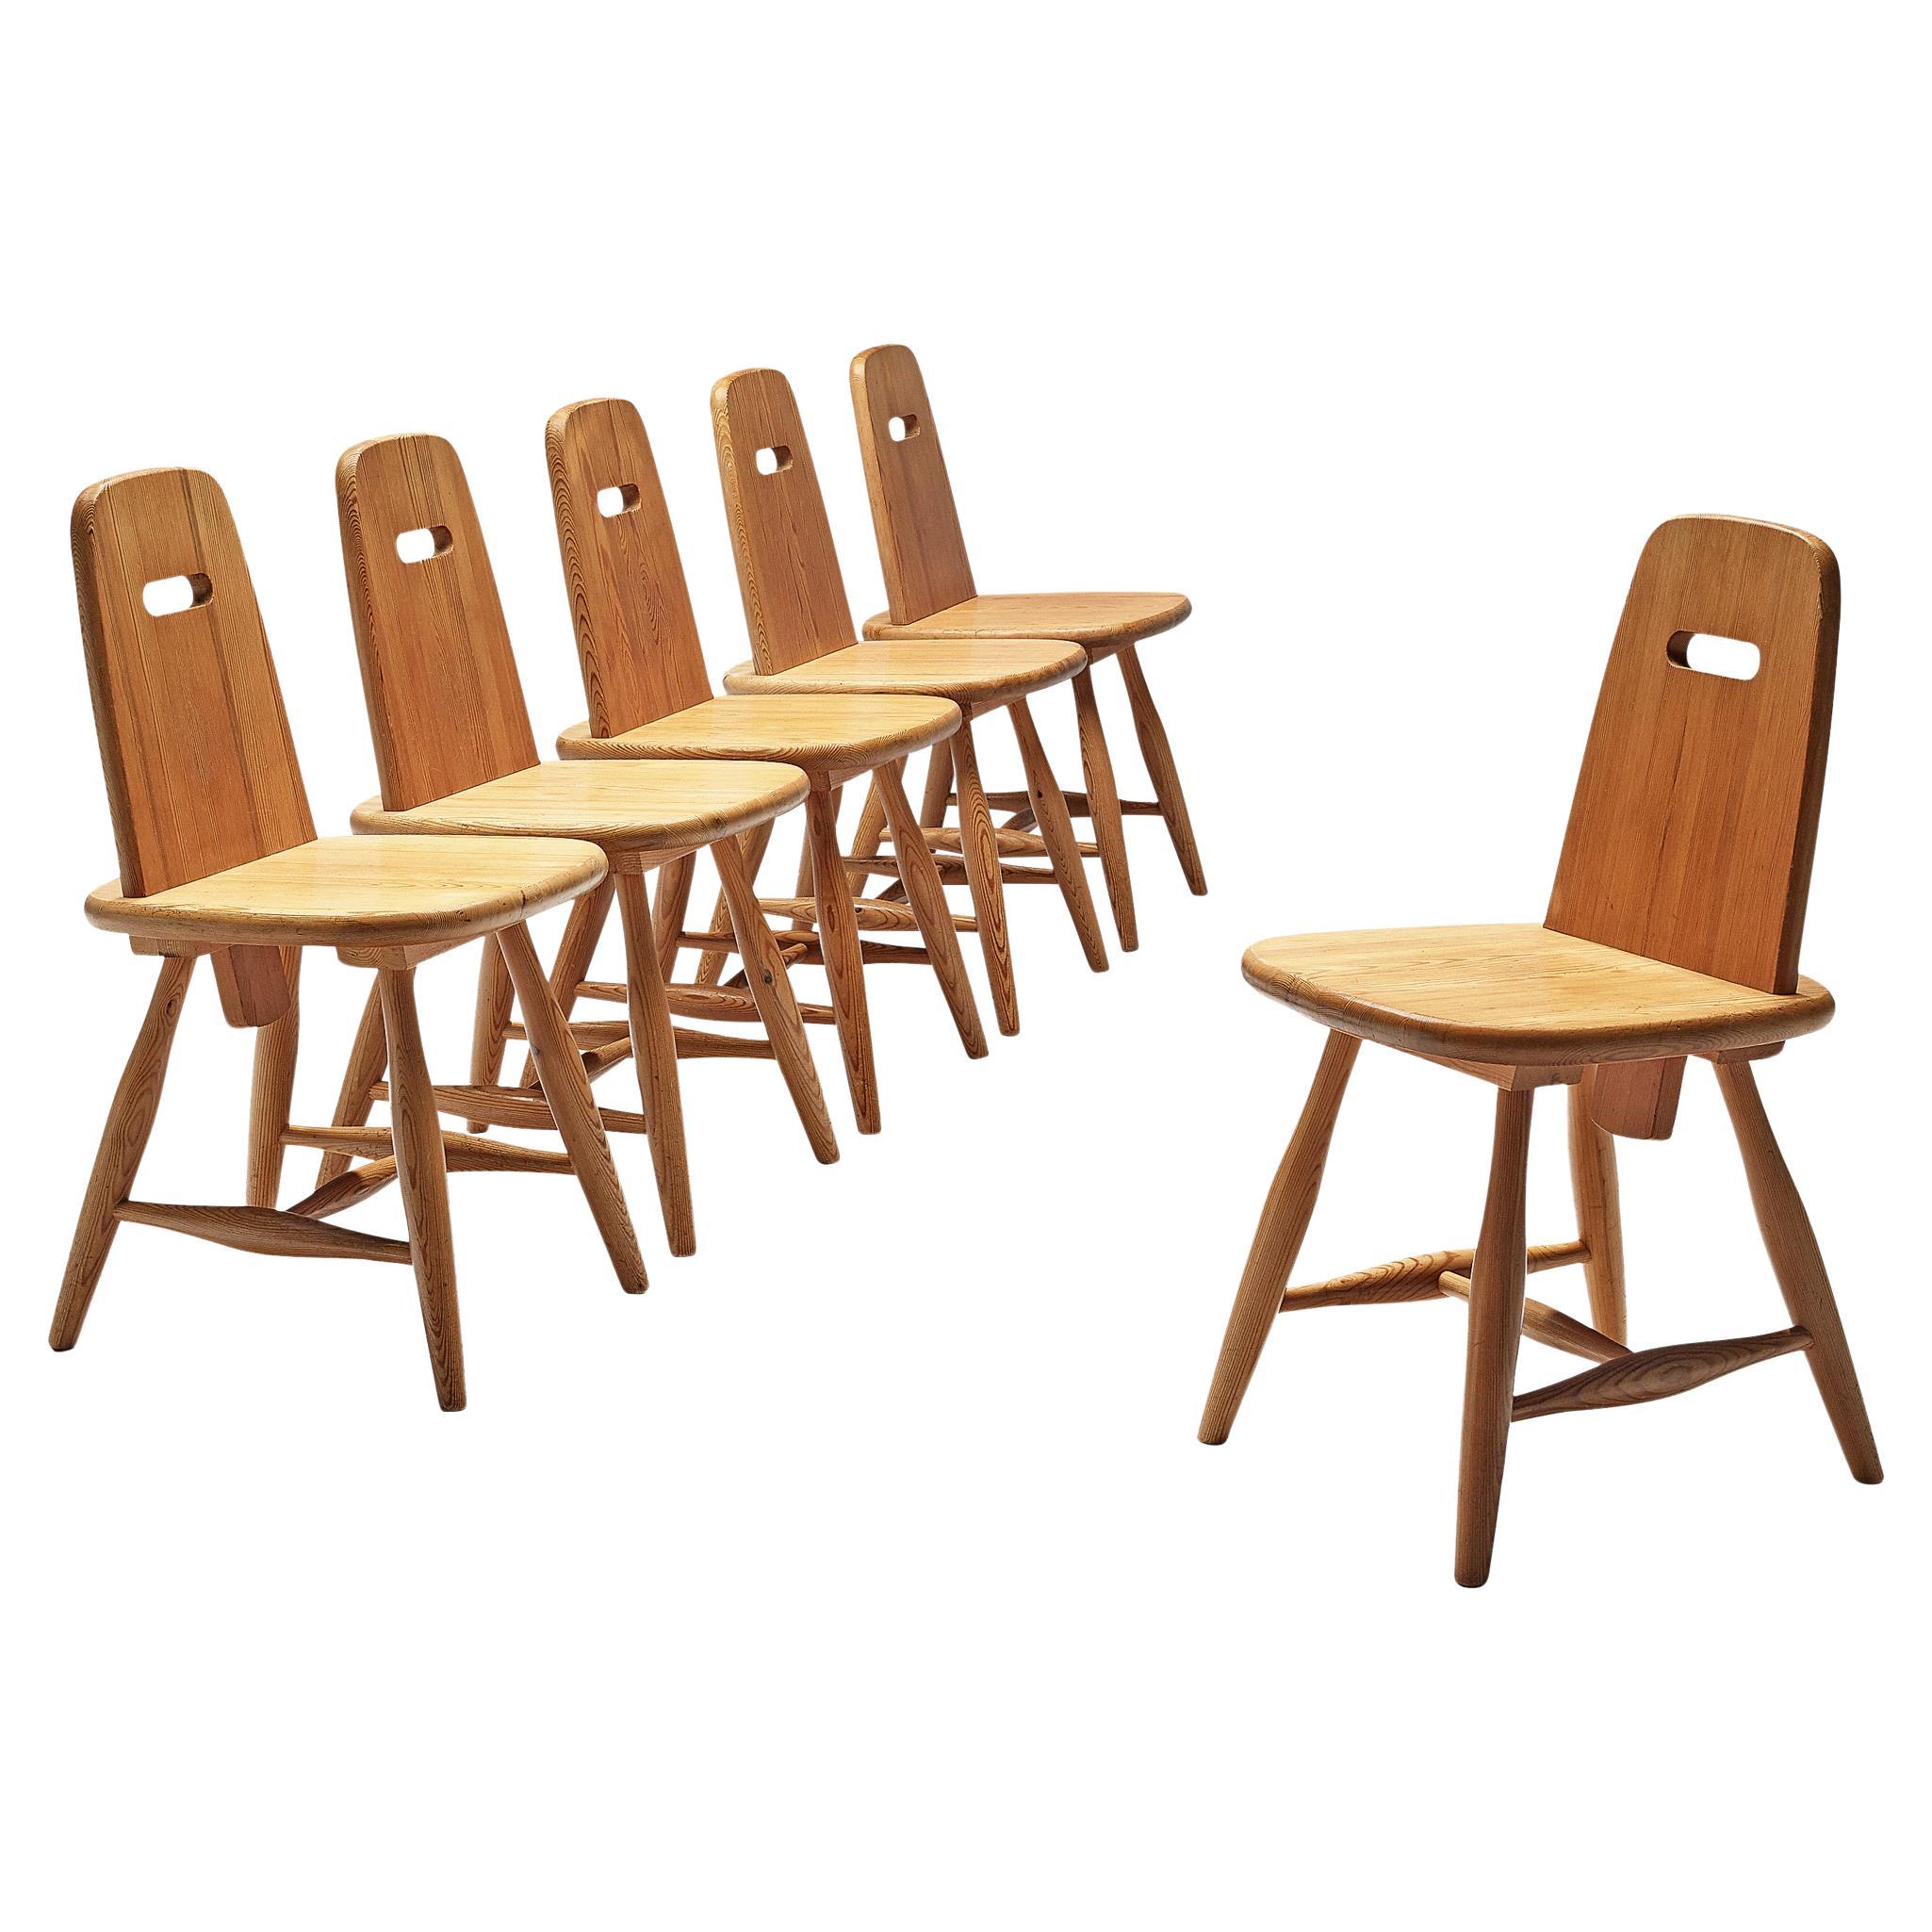 Eero Aarnio for Laukaan Puu Set of Six Dining Chairs in Solid Pine 